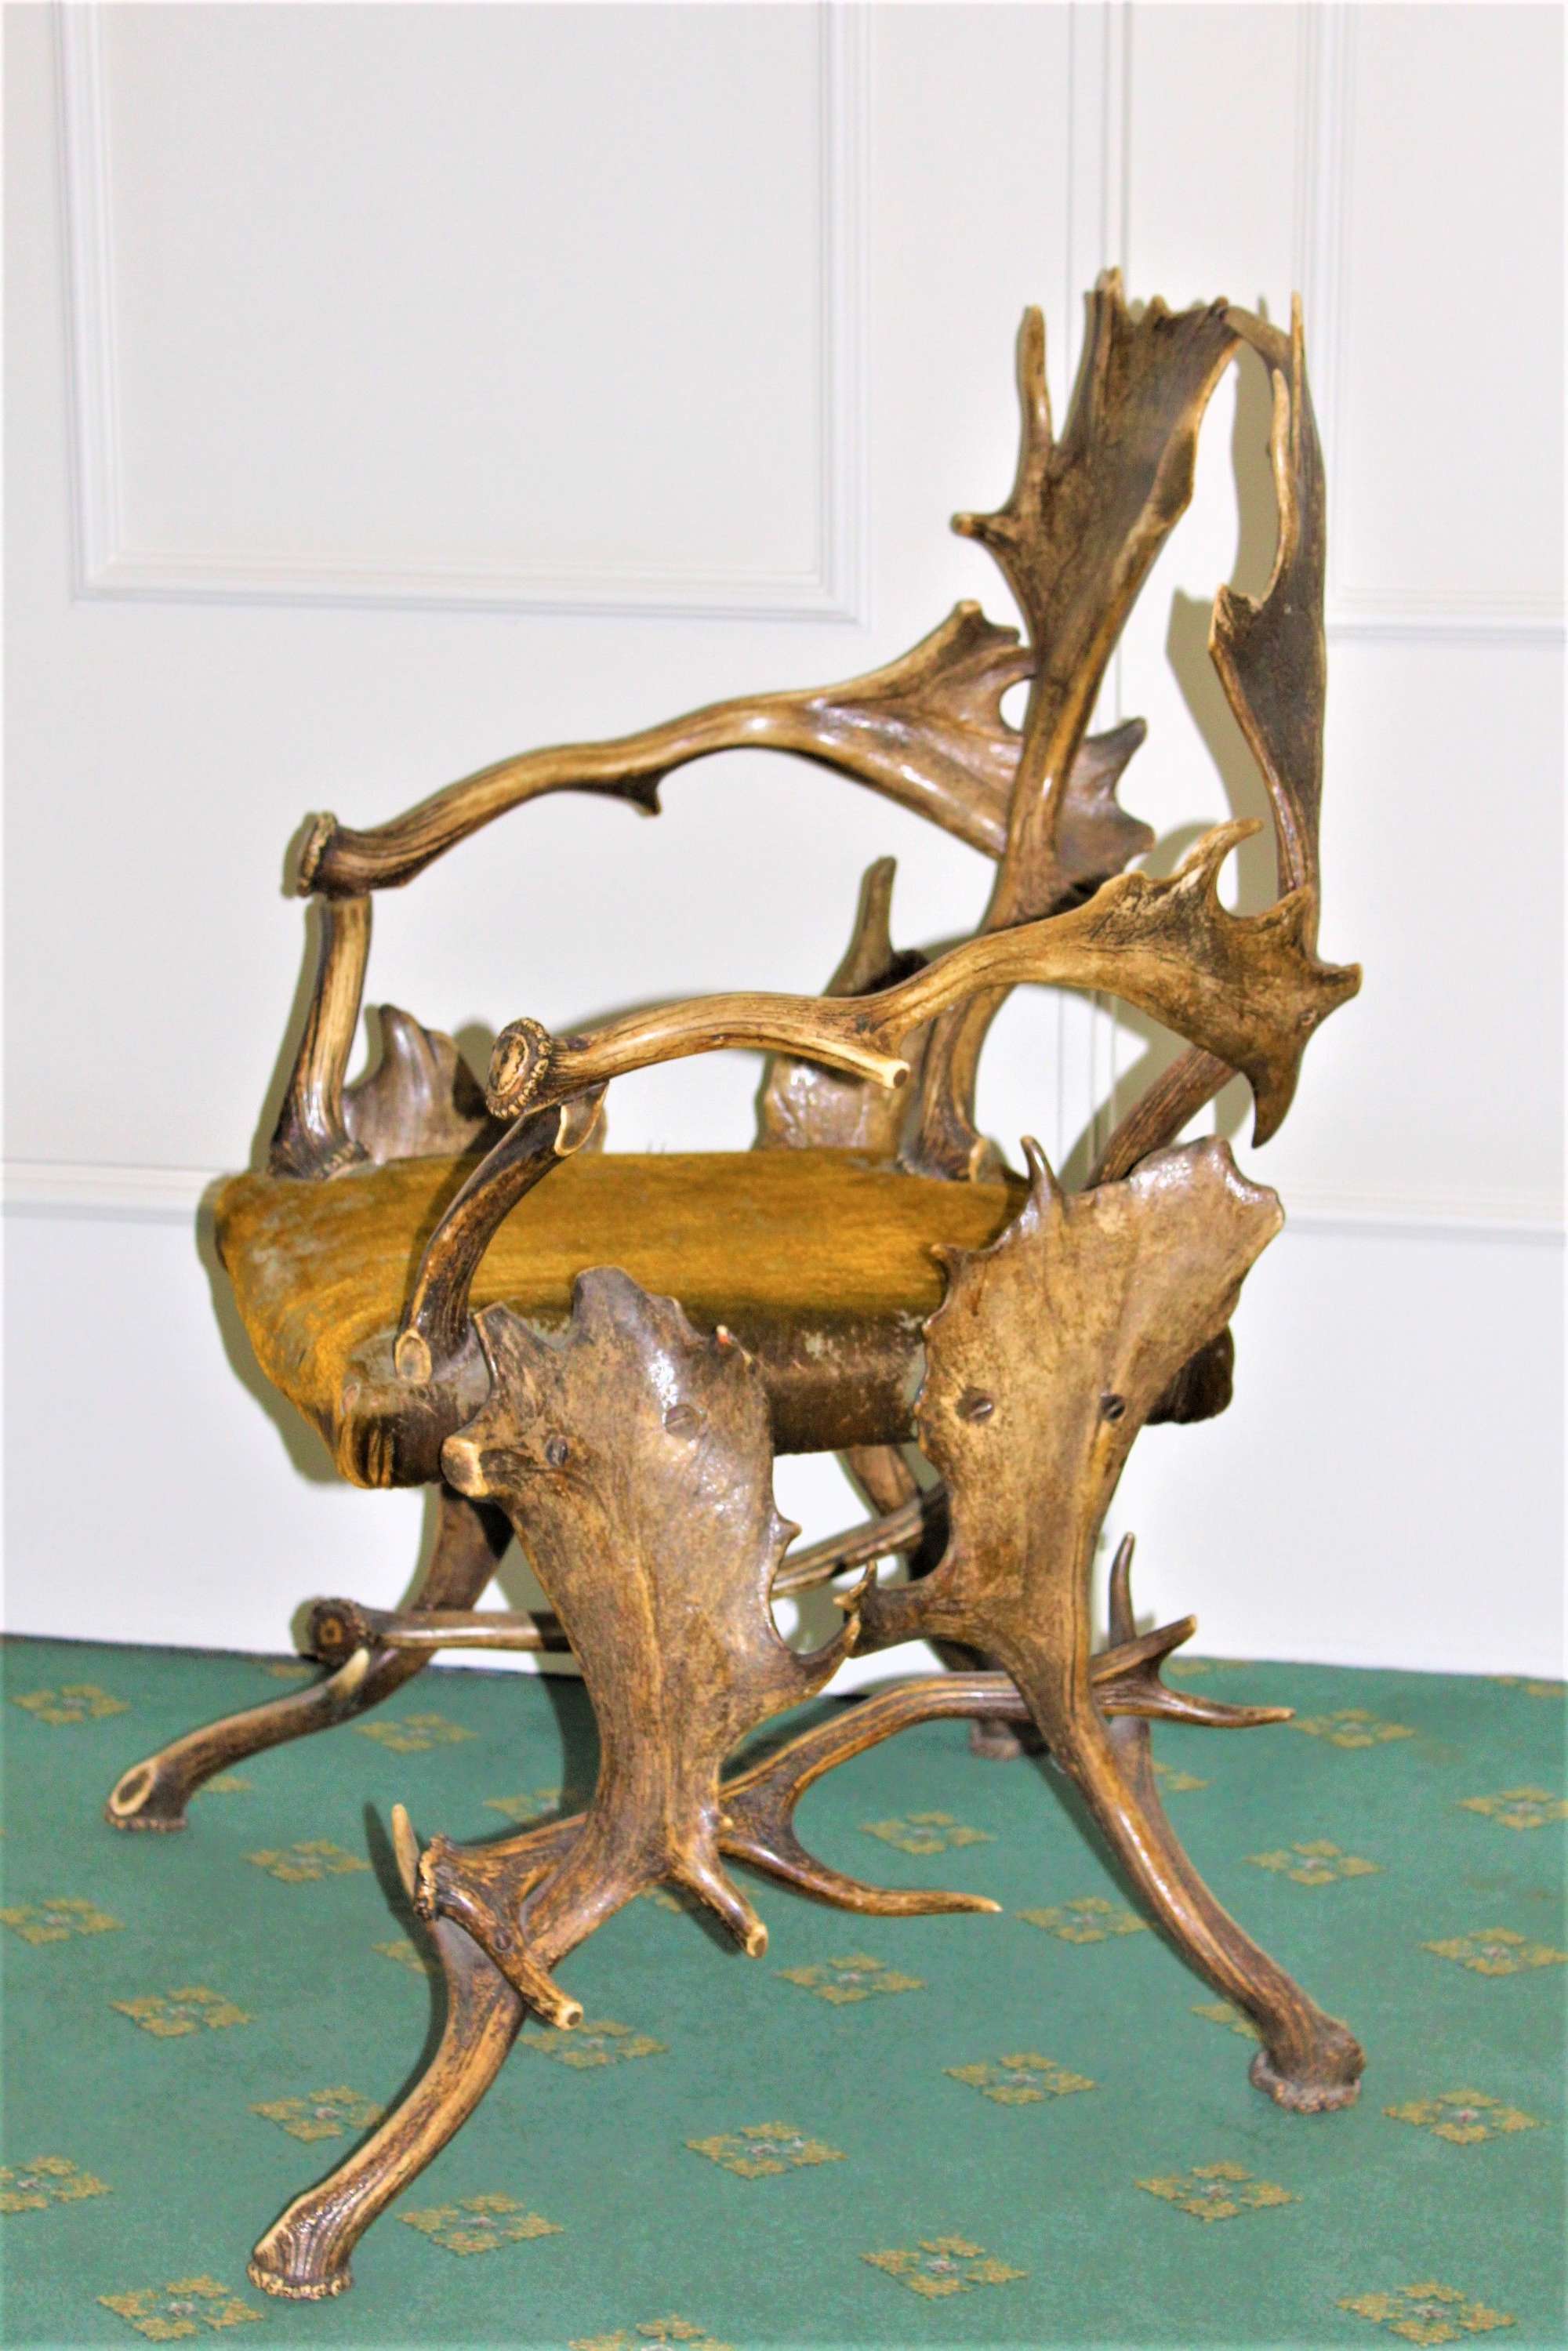 A Well Formed Stag Horn Antique Chair Originating From The Black Forest Area